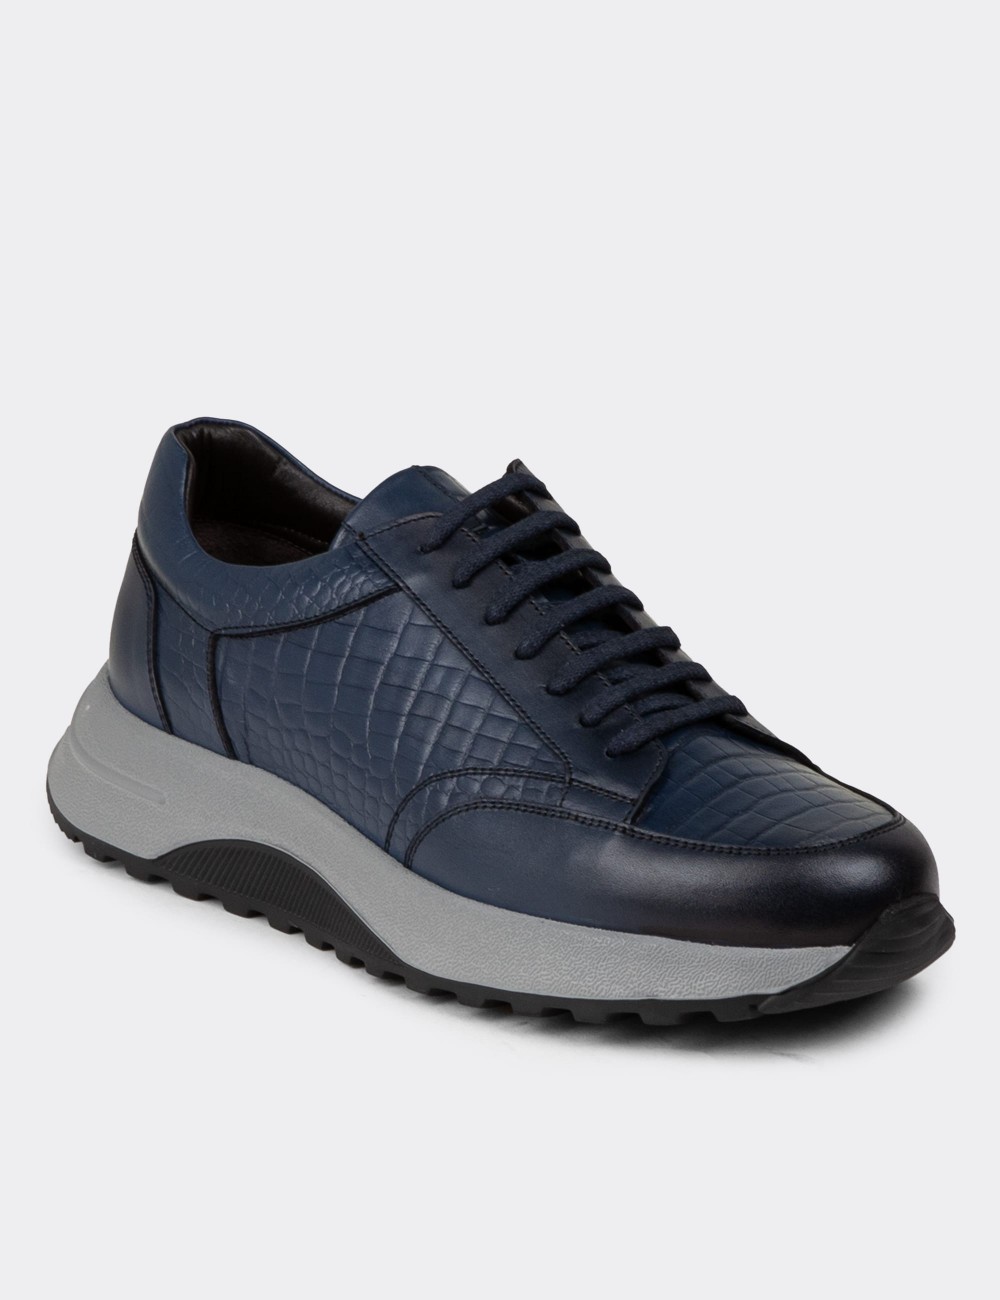 Navy Leather Sneakers - 01984MLCVE01